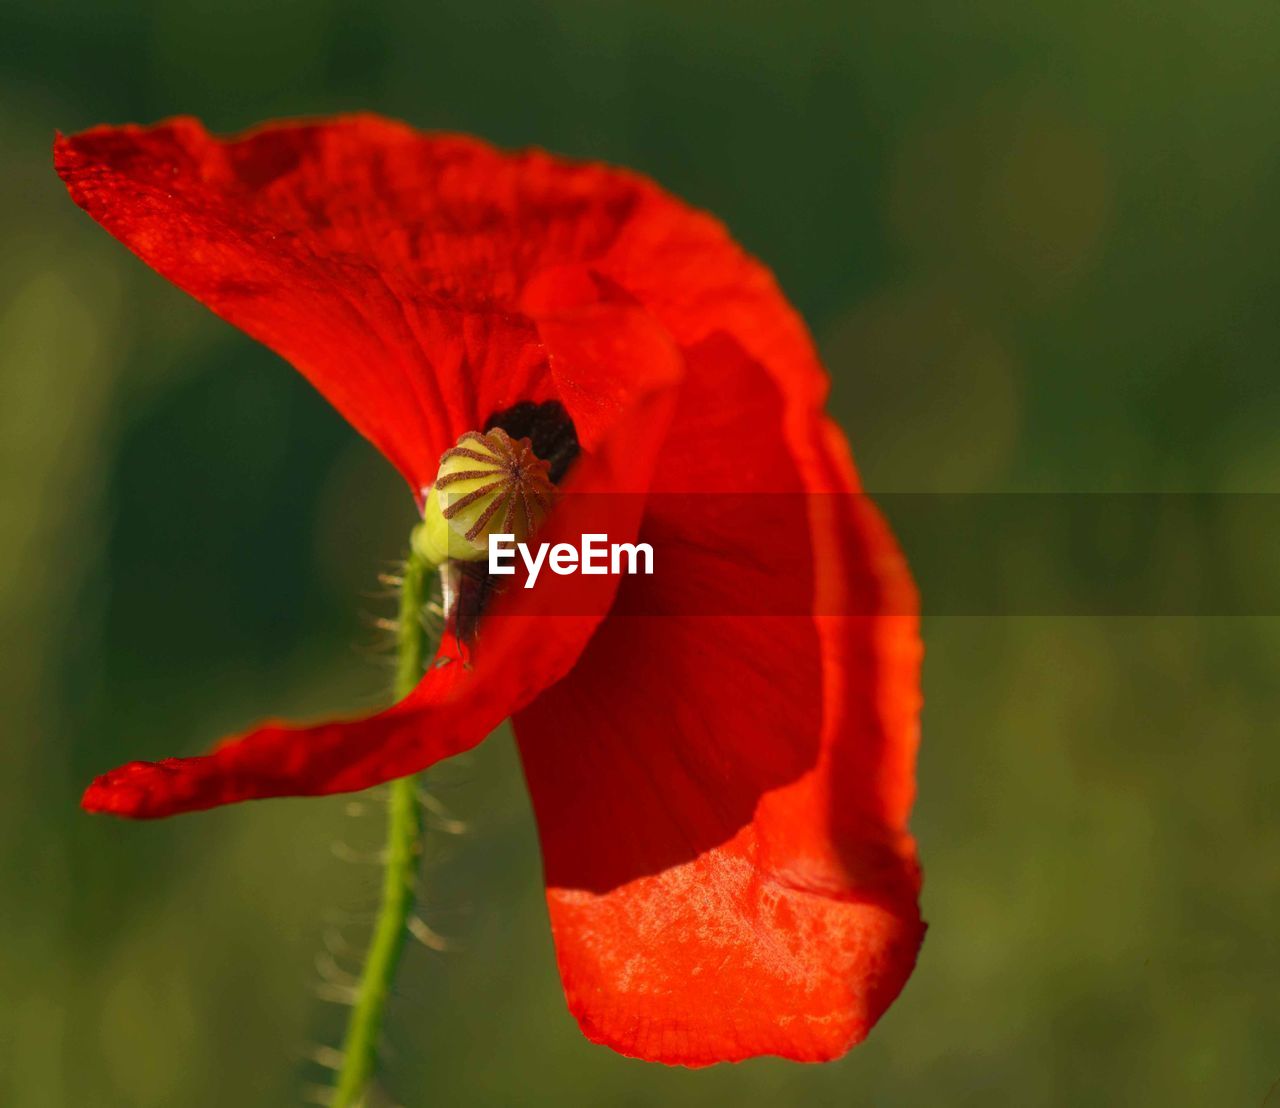 CLOSE-UP OF RED POPPY FLOWER ON LEAF